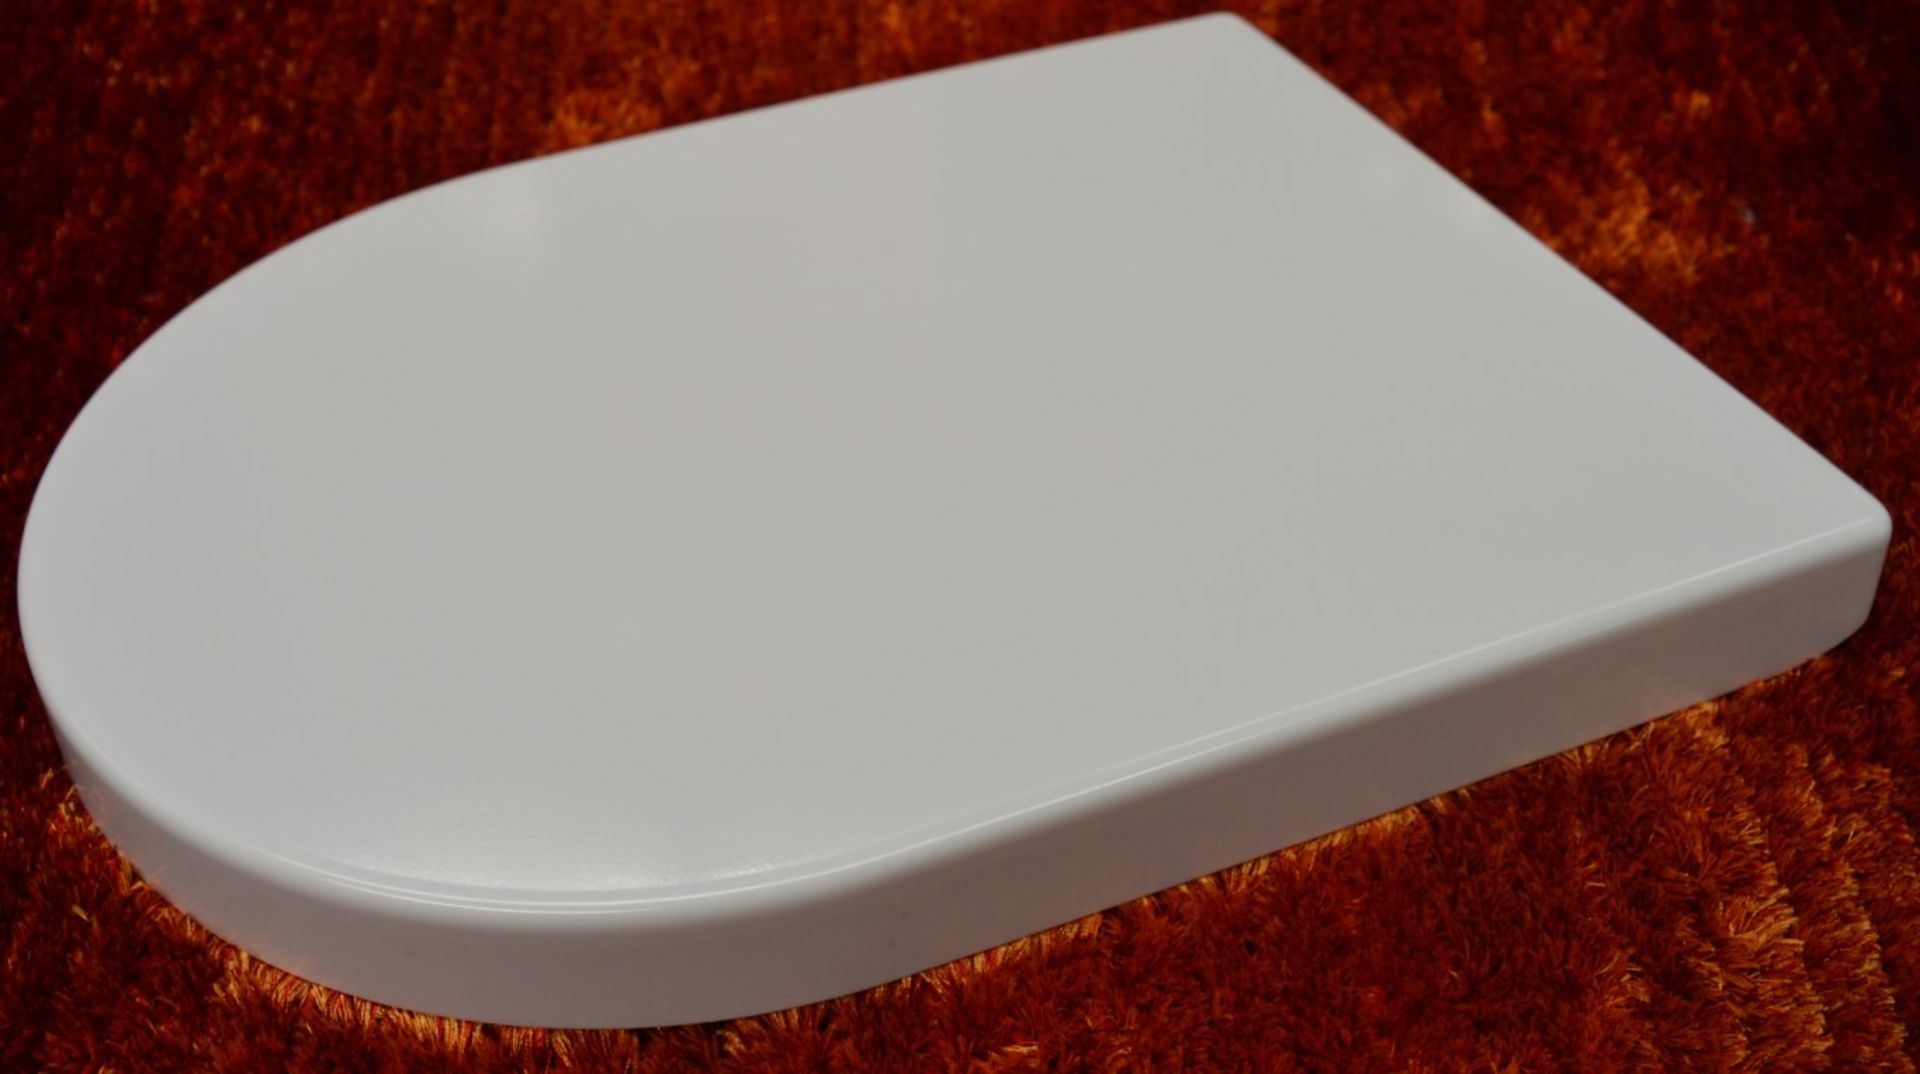 1 x Vogue Cosmos Modern White Soft Close Toilet Seat and Cover Top Fixing - Brand New Boxed - Image 5 of 7